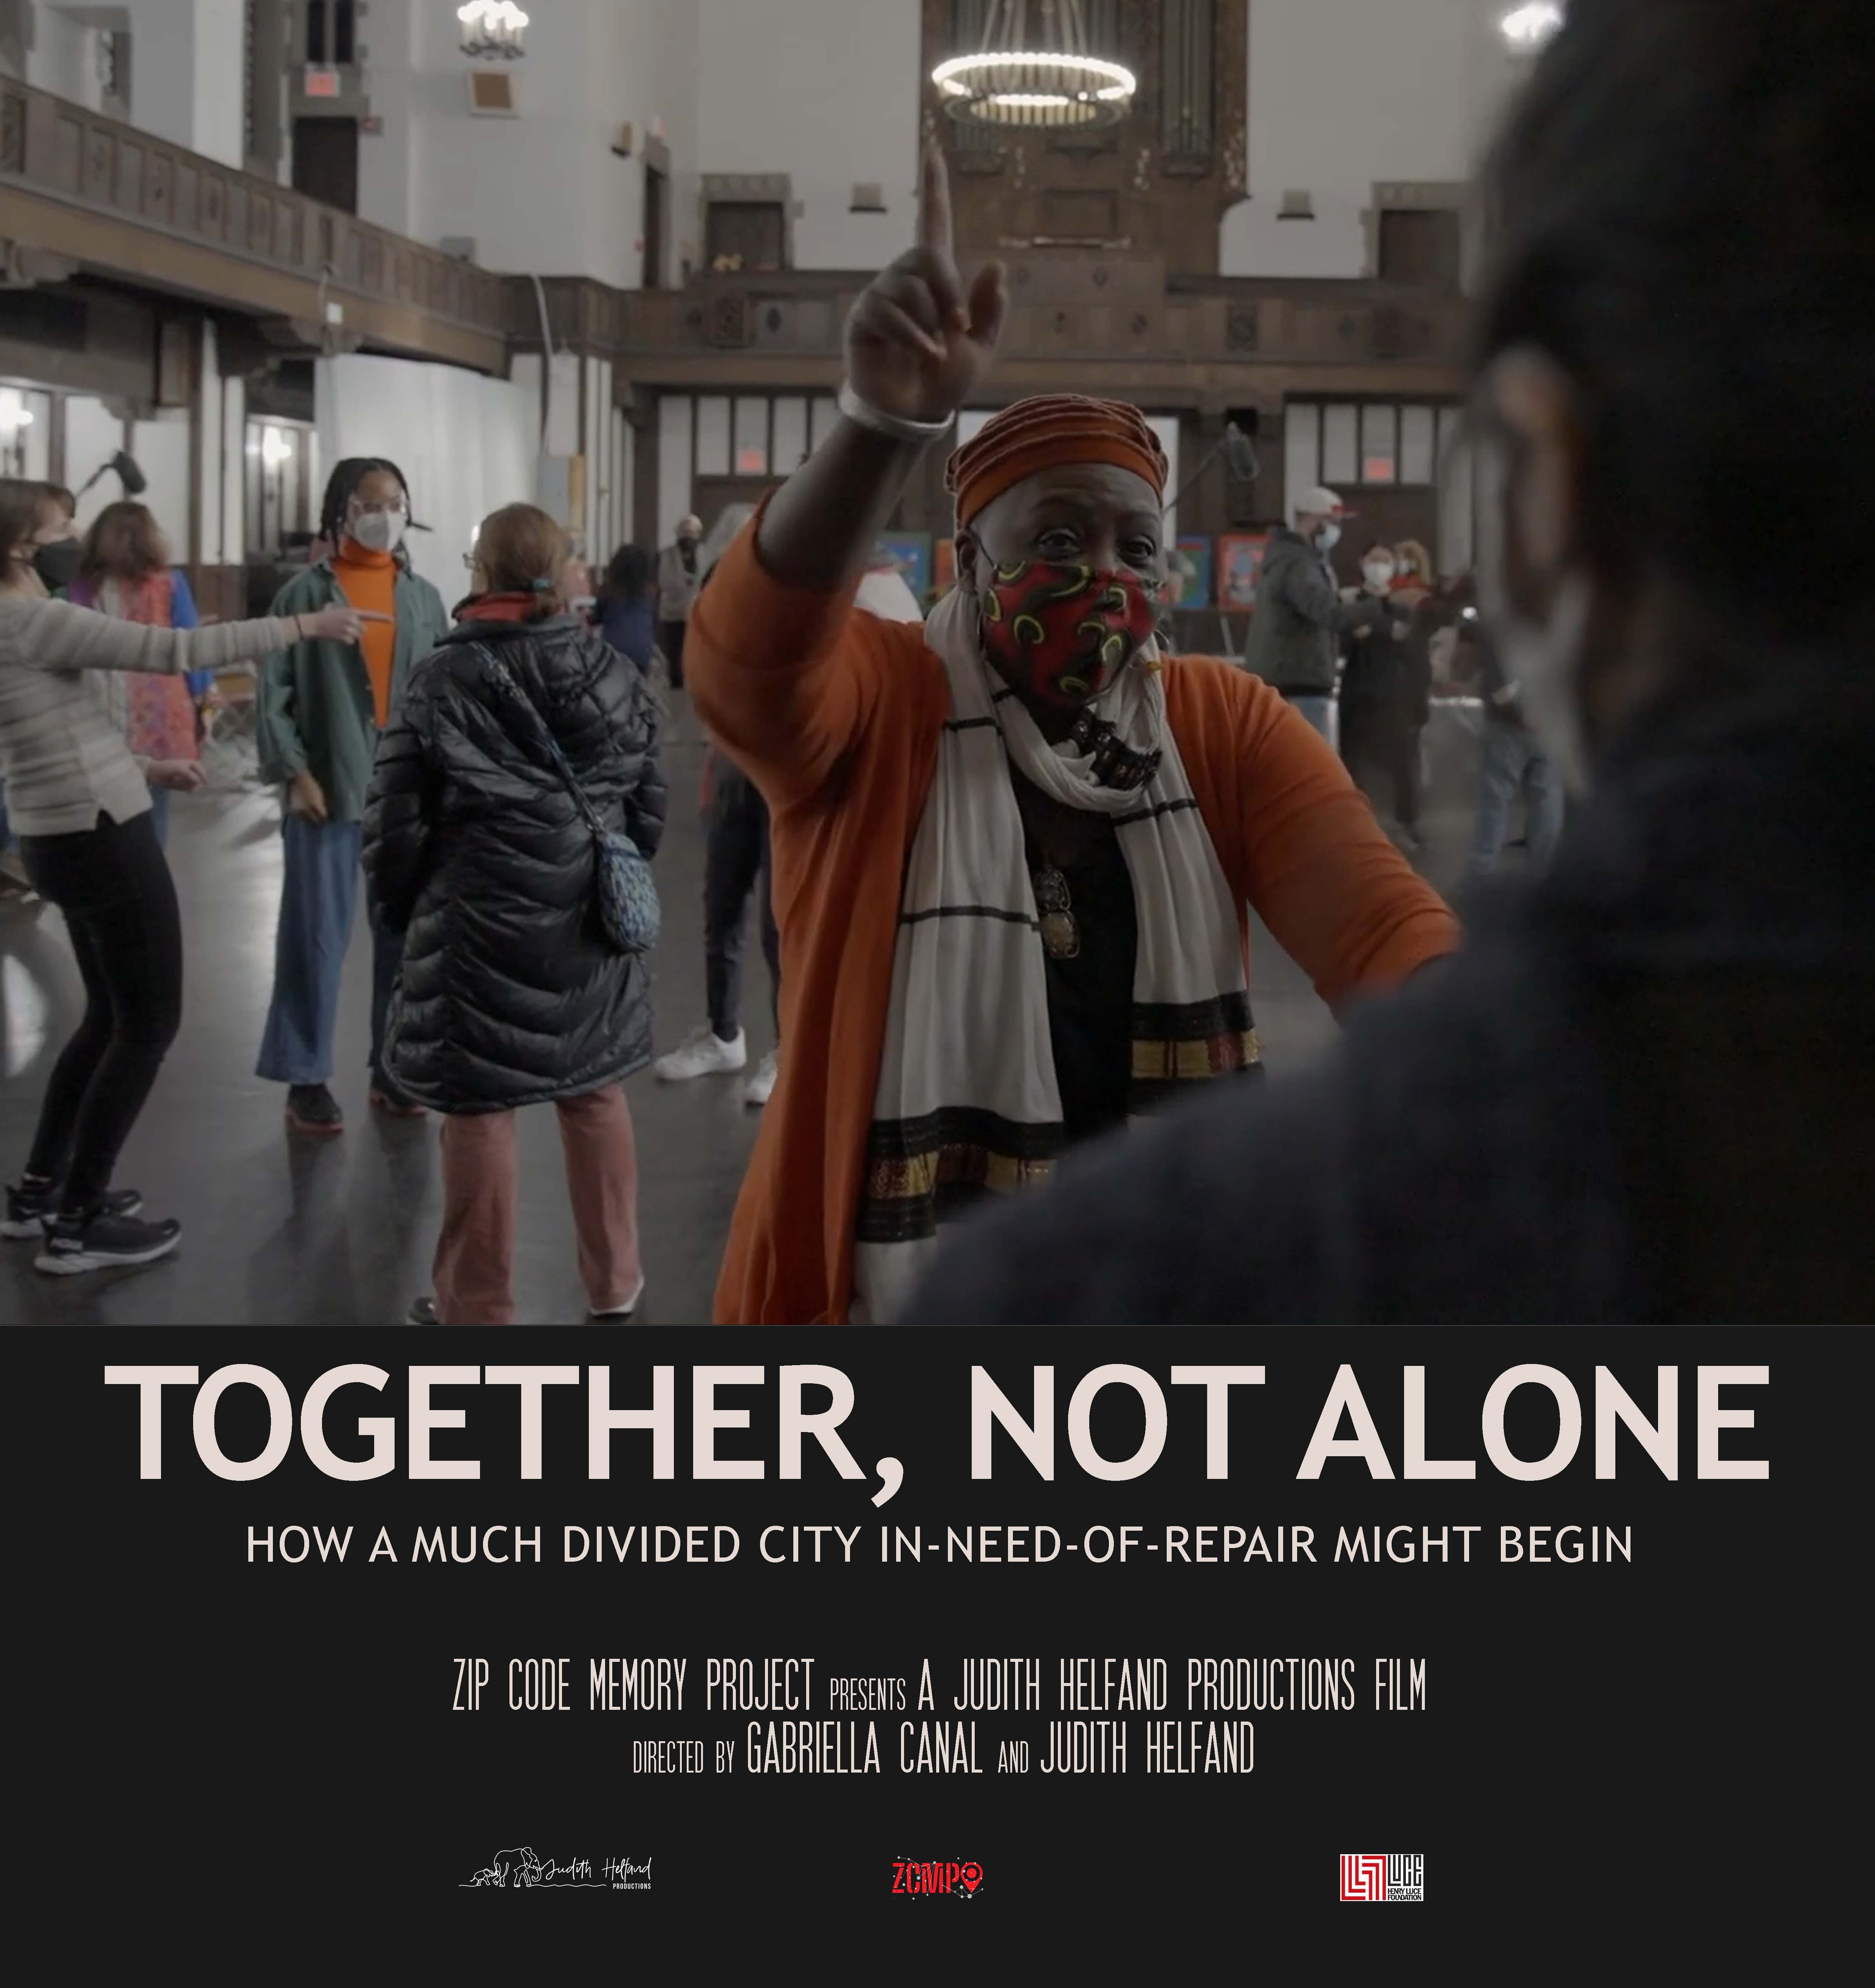 Movie Poster Together, Not Alone featuring a woman raising a finger in a room full of people.